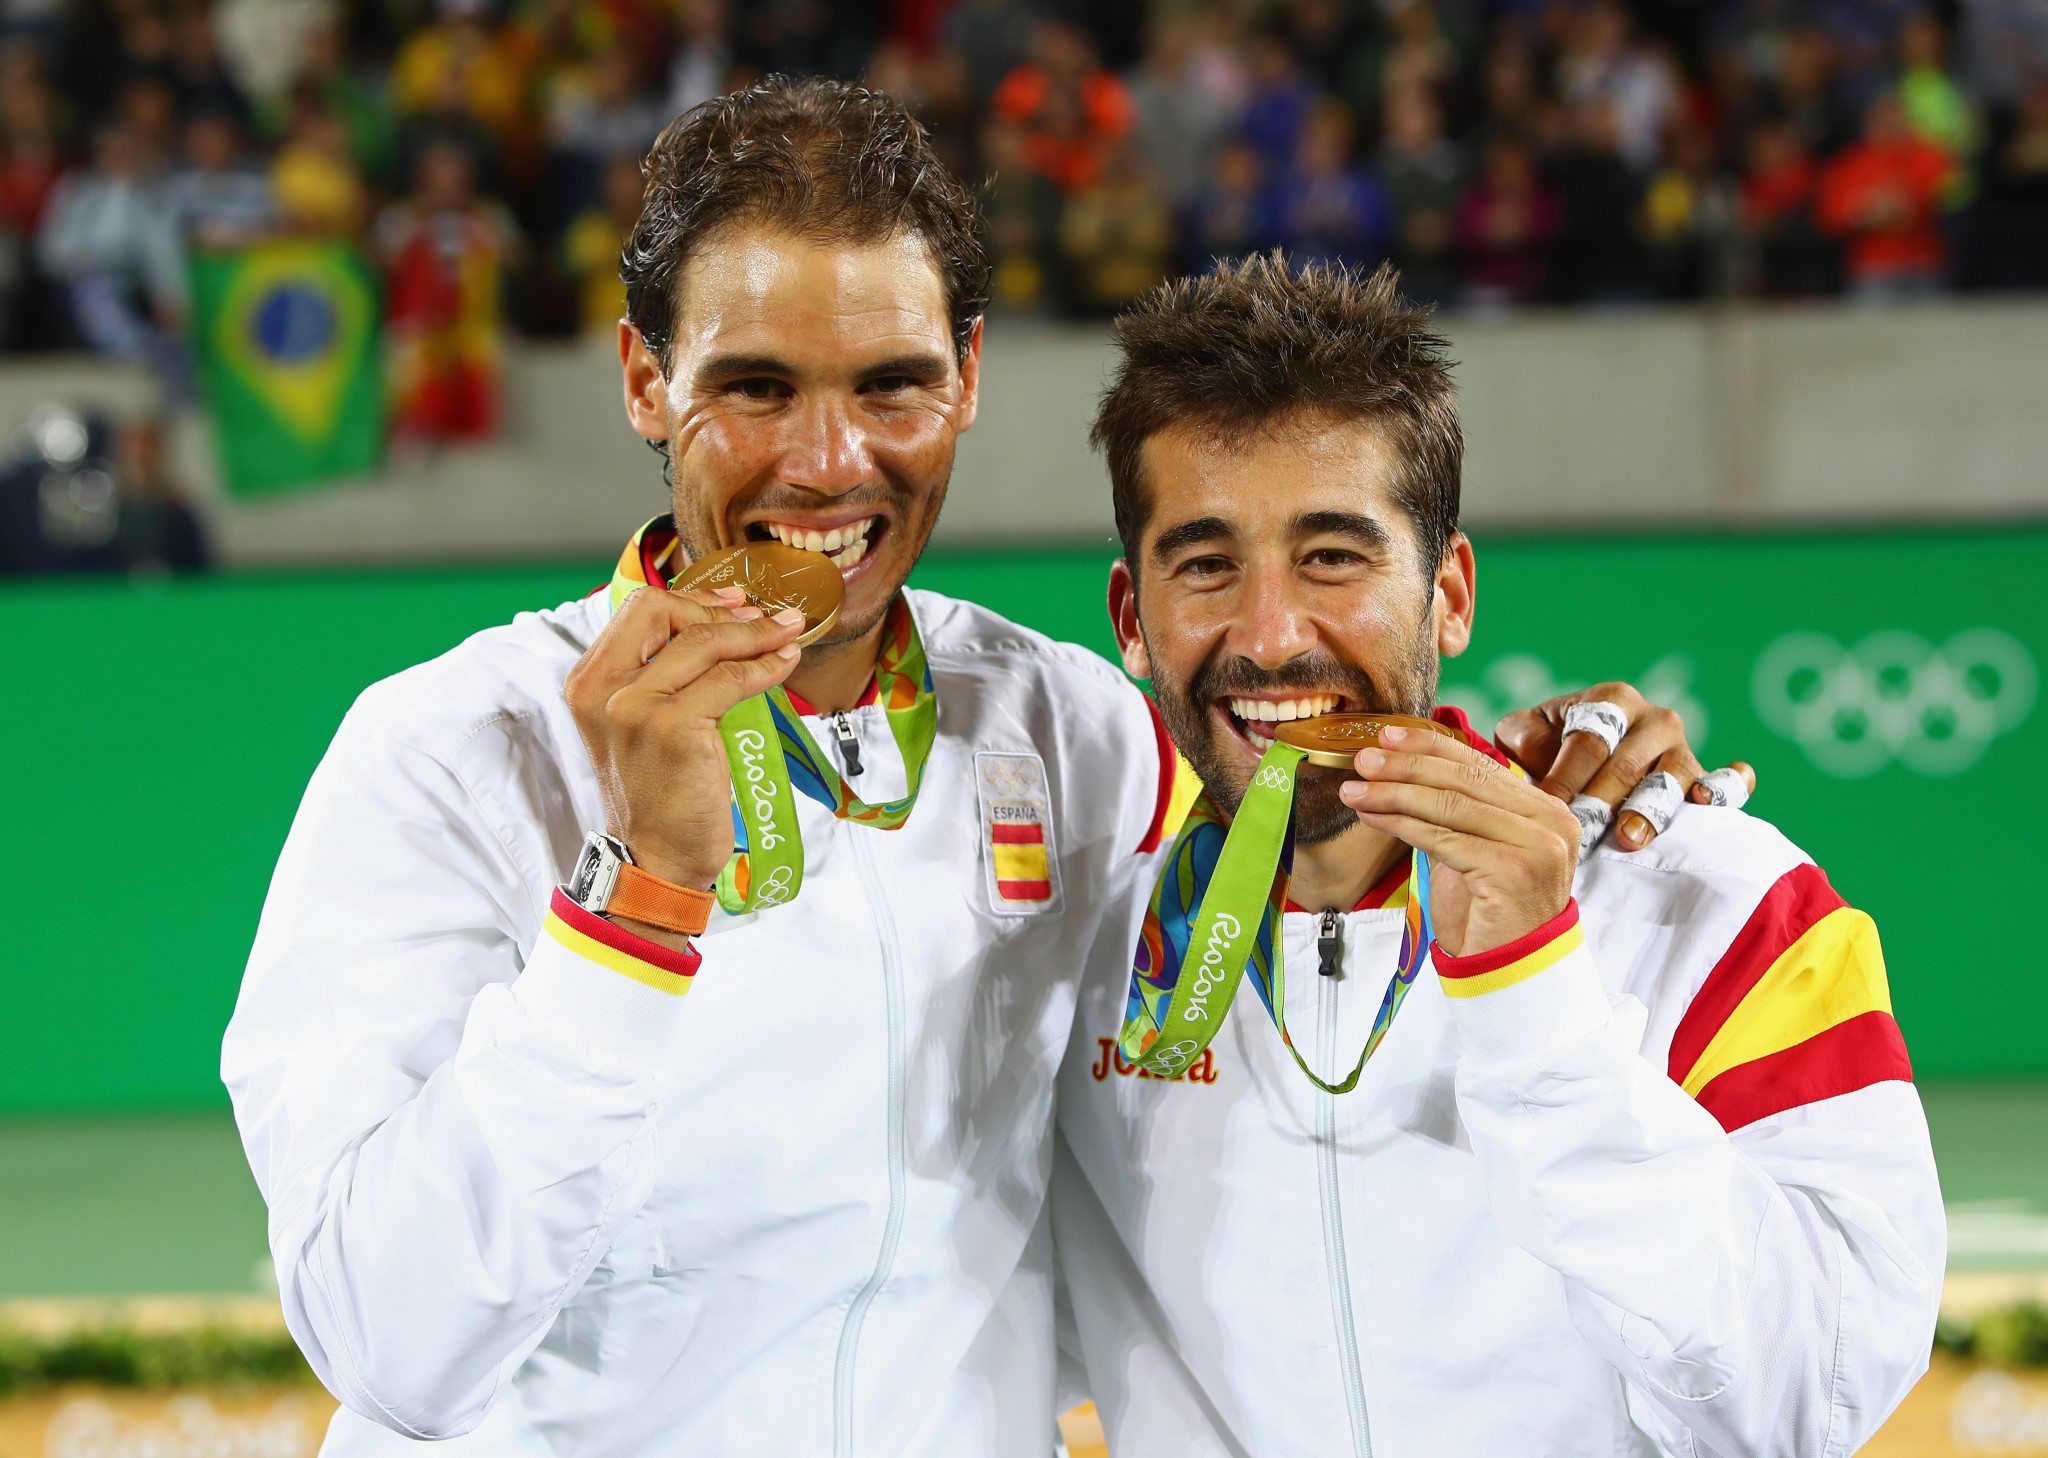 Rafael Nadal, left, has won two Olympic gold medals with Spain during an illustrious tennis career, which he plans to end next year ©Getty Images